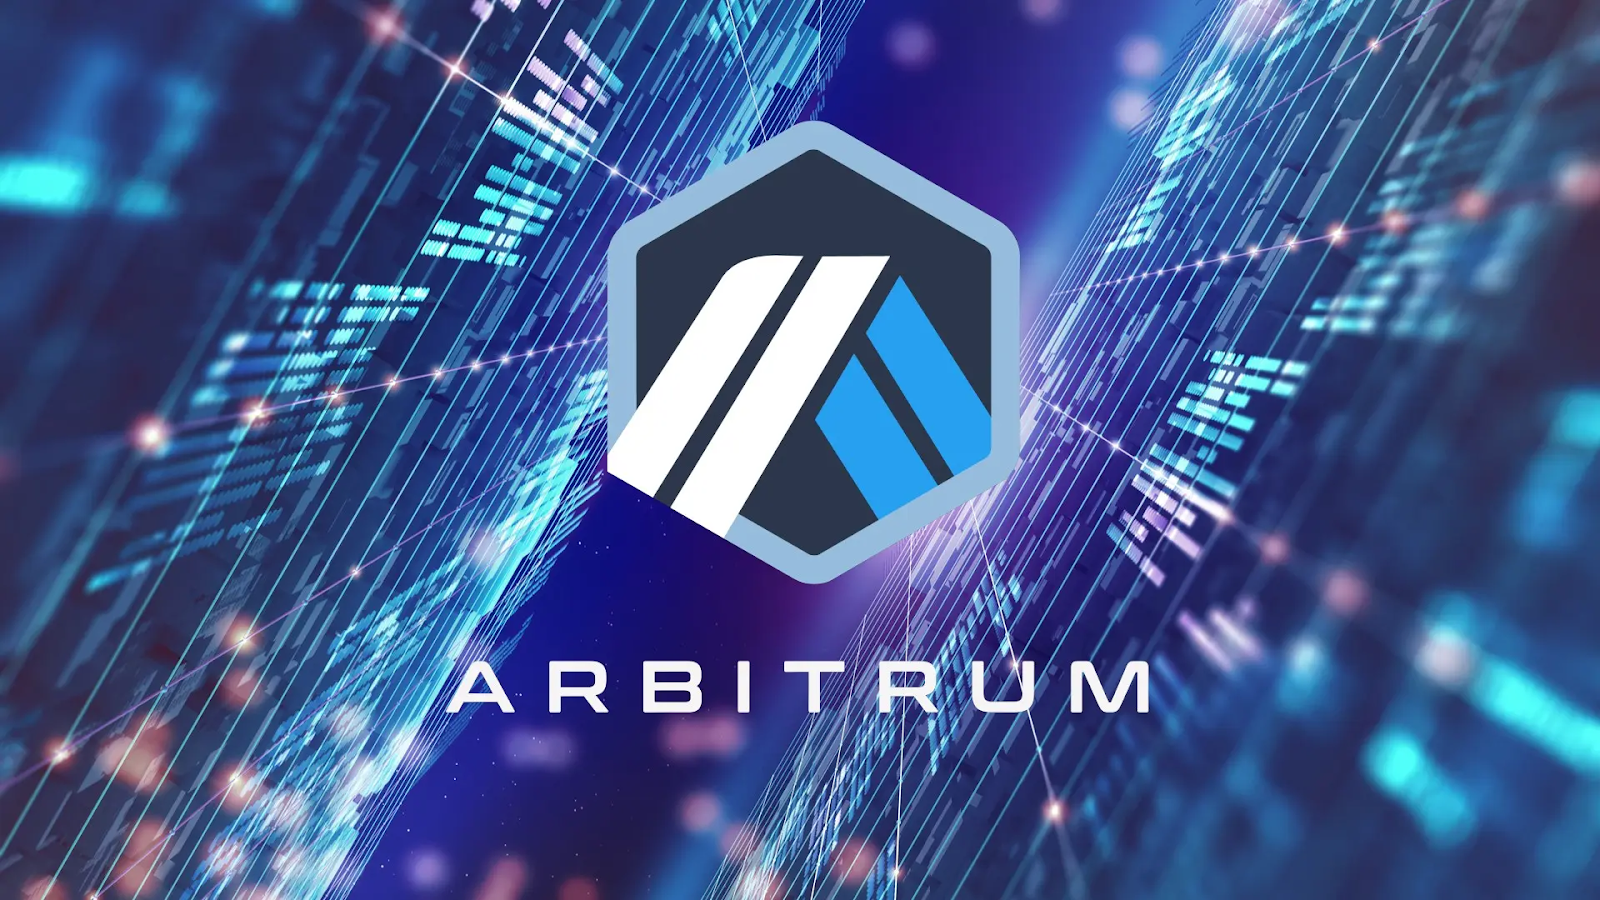 Market dynamics and future projections for ARB Token